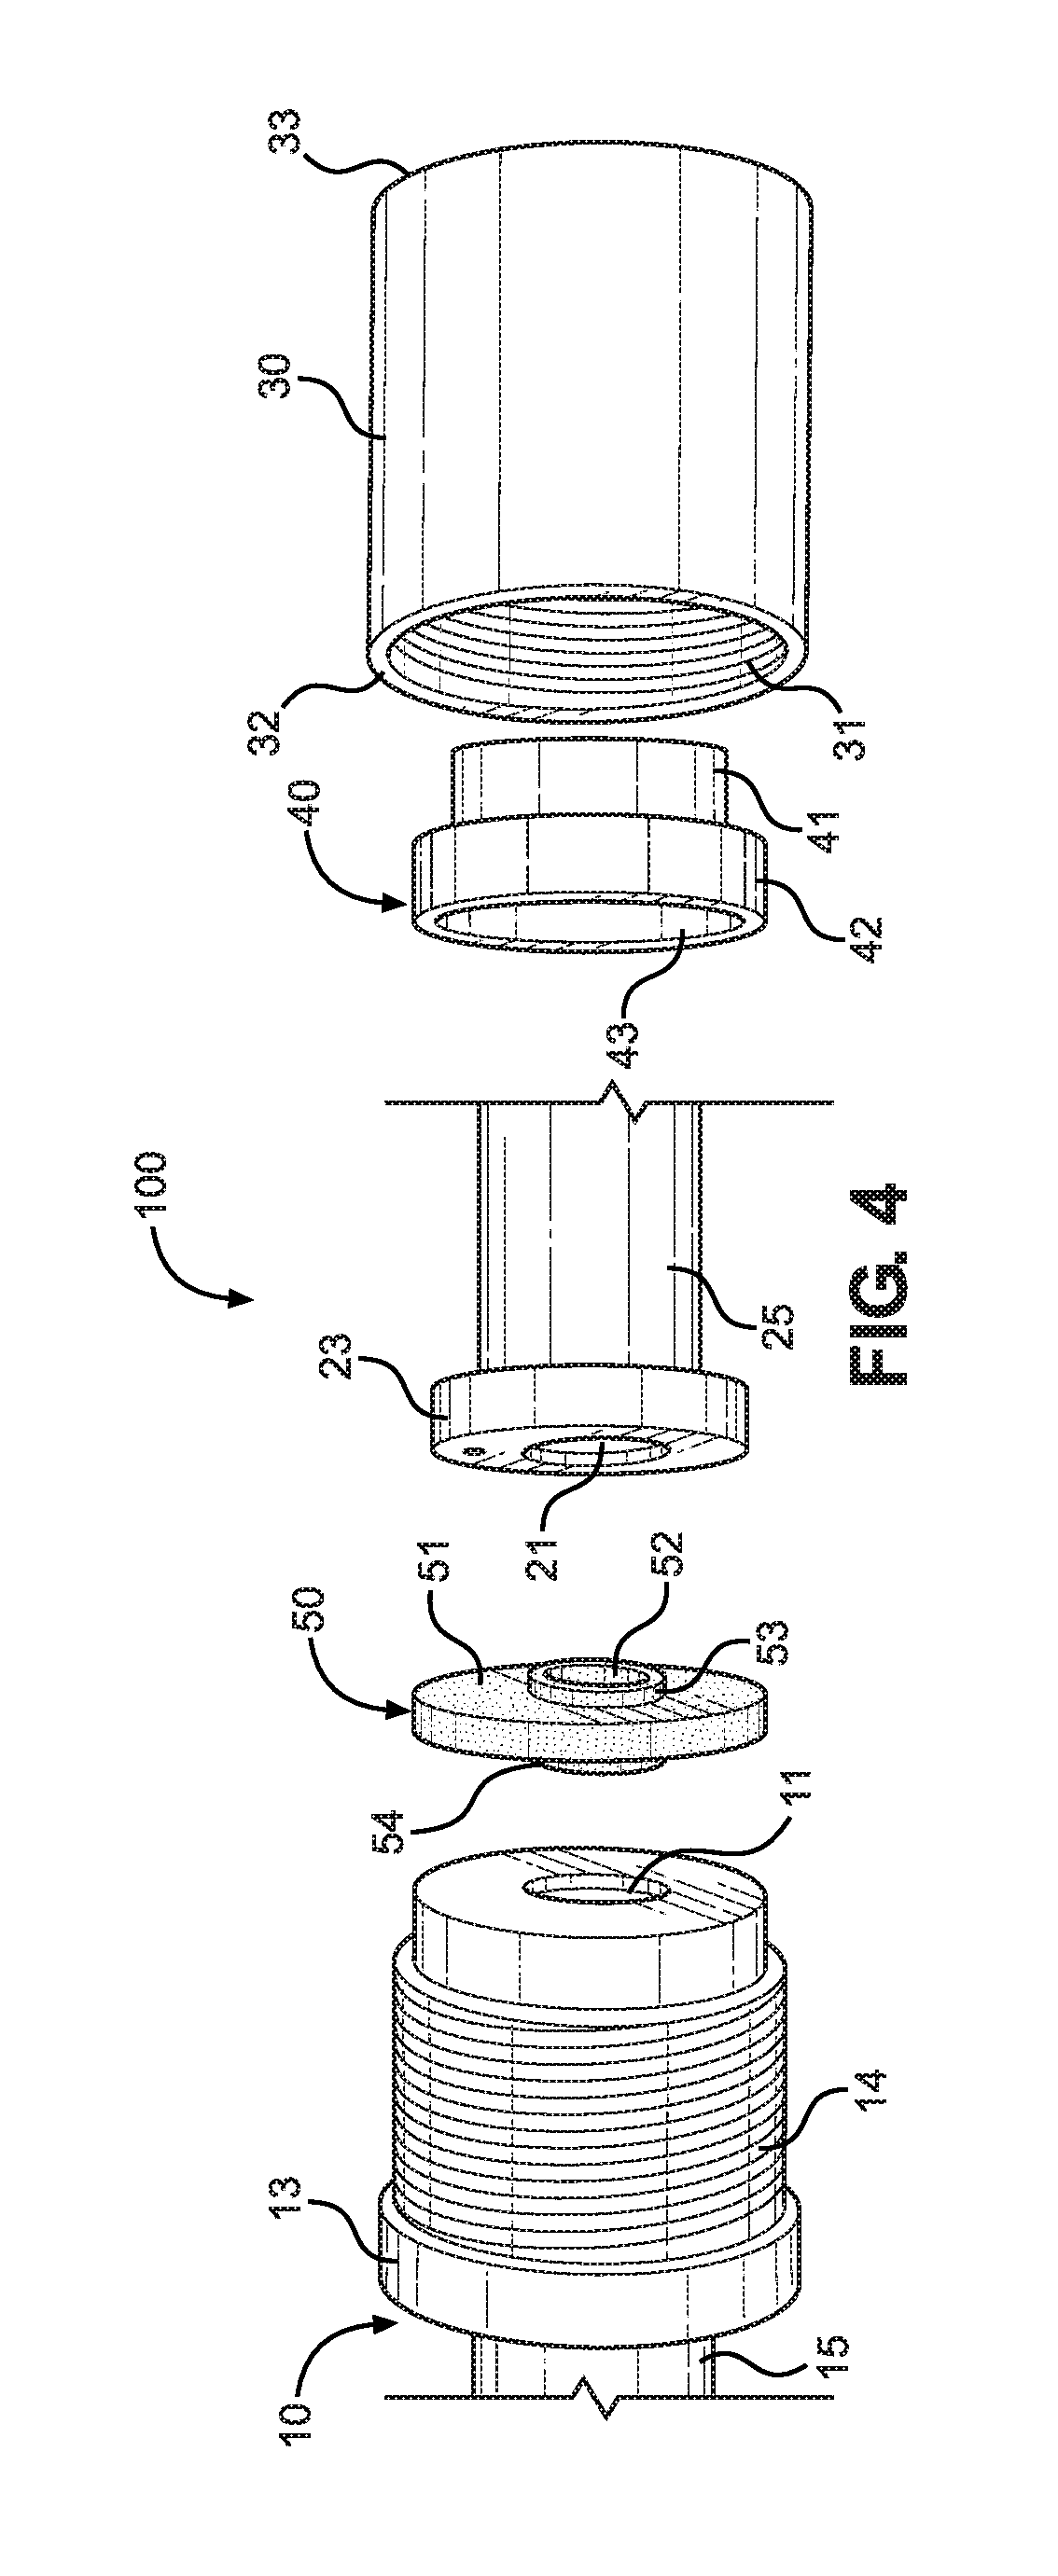 Method and apparatus for interrupting electrical conductivity through pipelines or other tubular goods